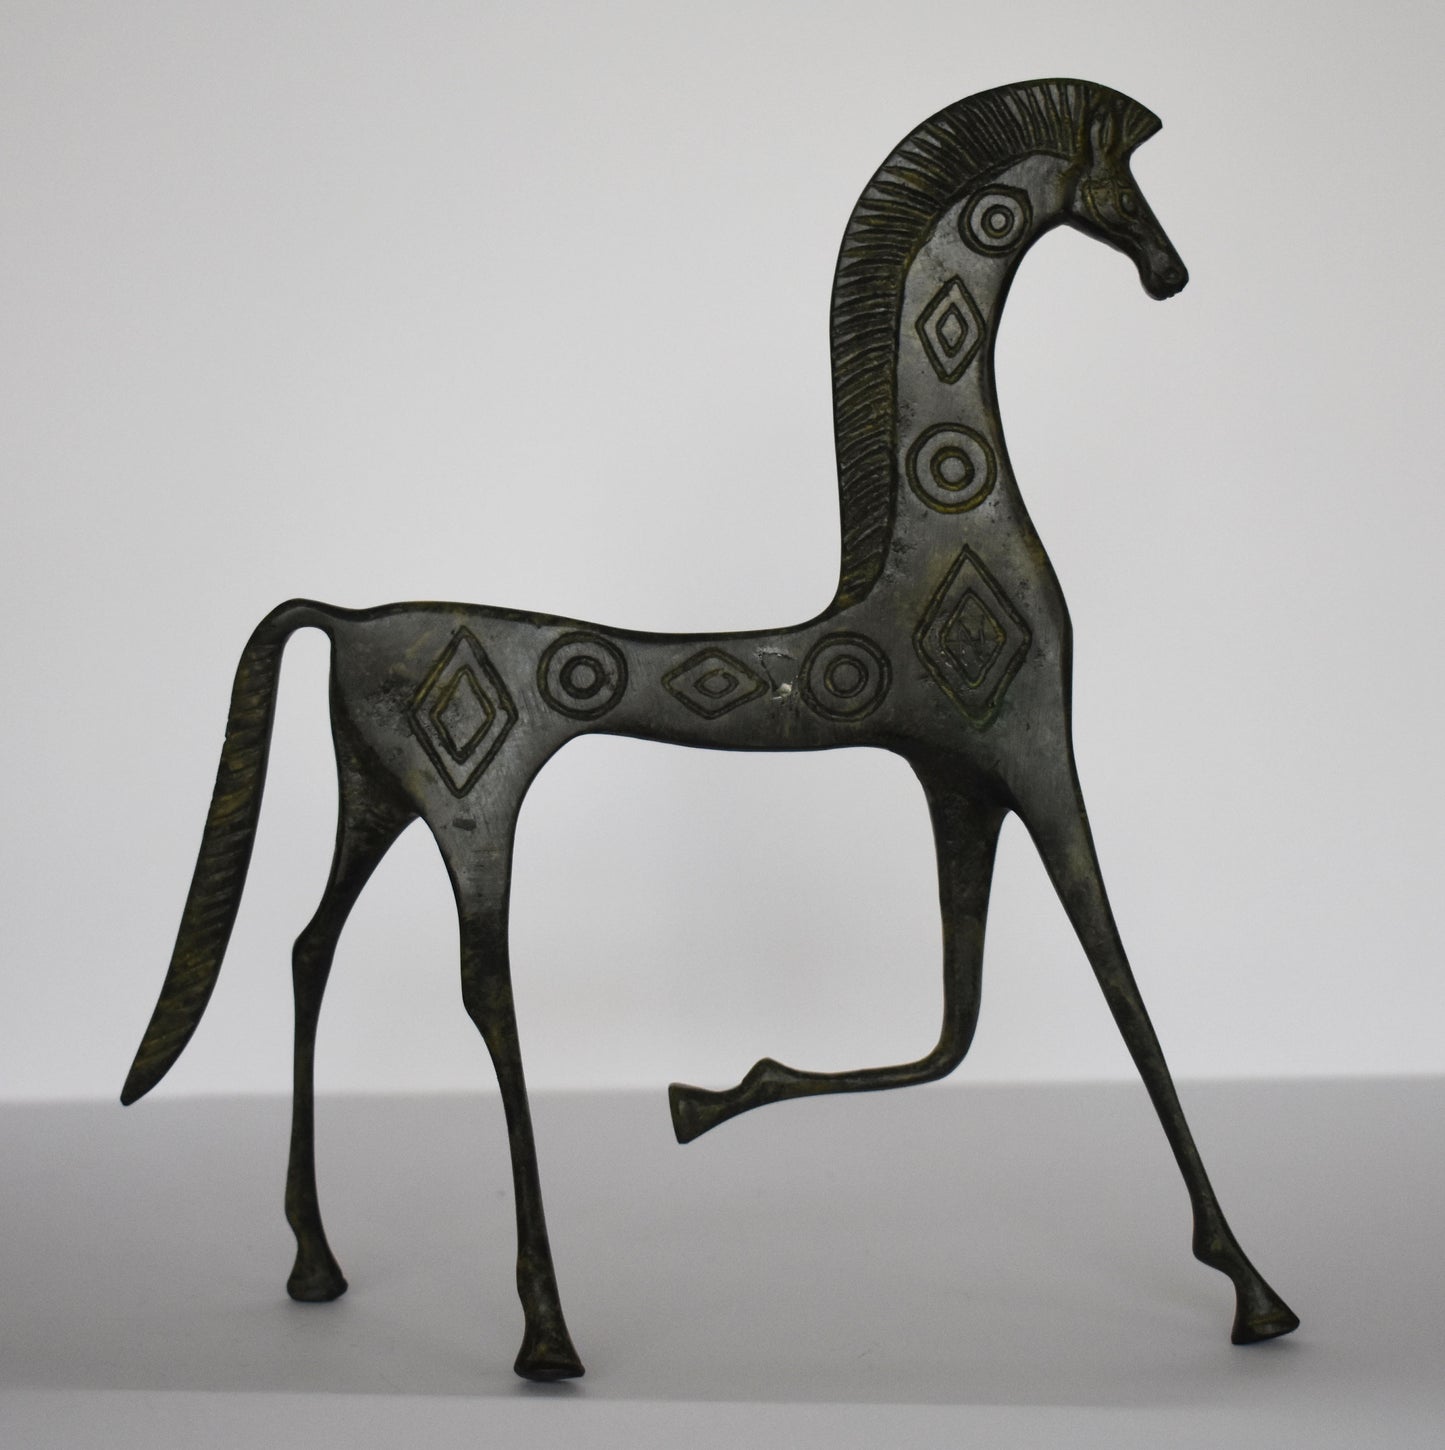 Ancient Greek Horse - History - pure Bronze Sculpture - Symbol of Wealth and Prosperity